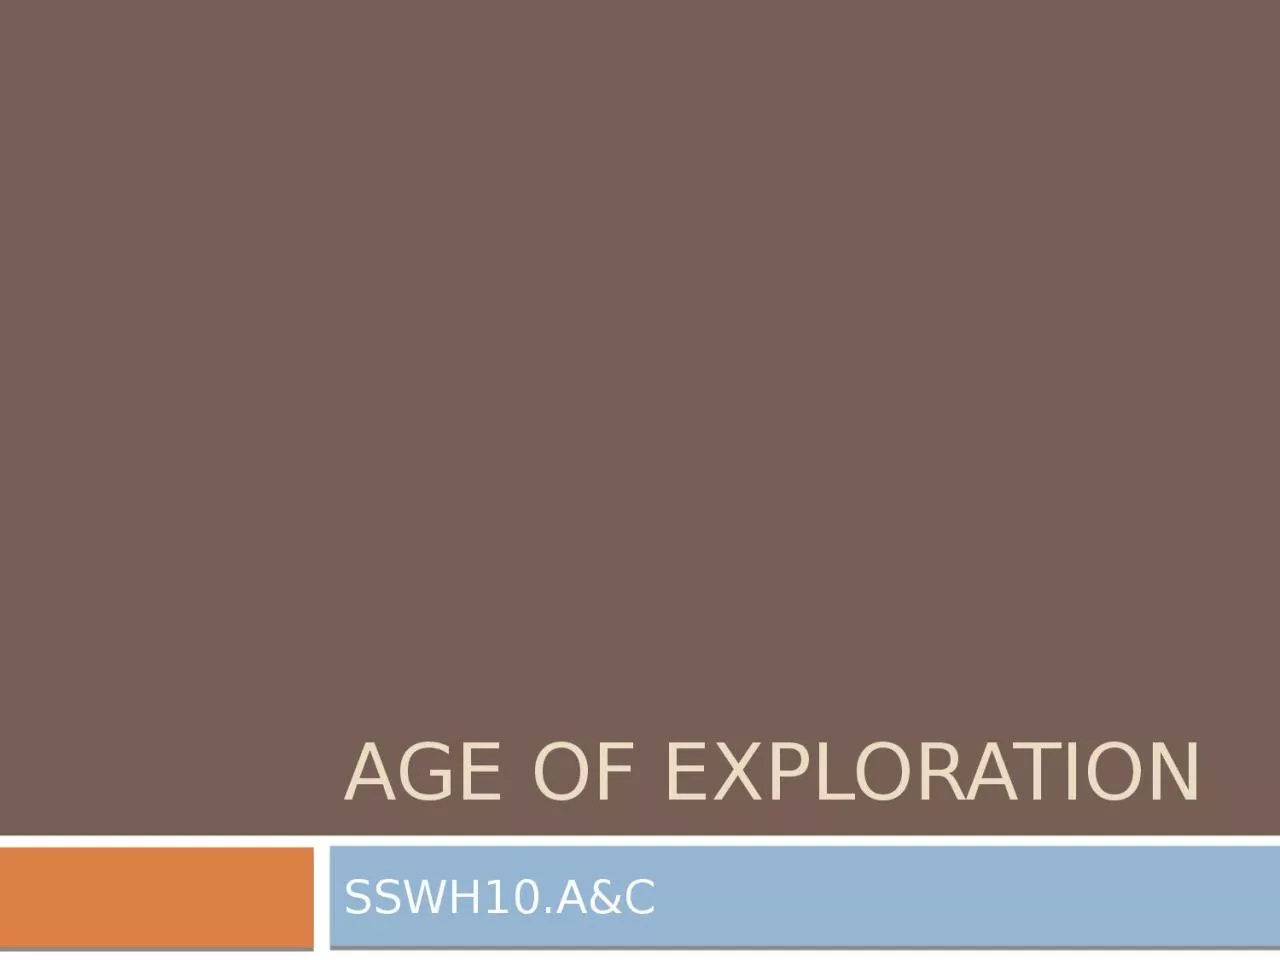 Age of exploration SSWH10.A&C